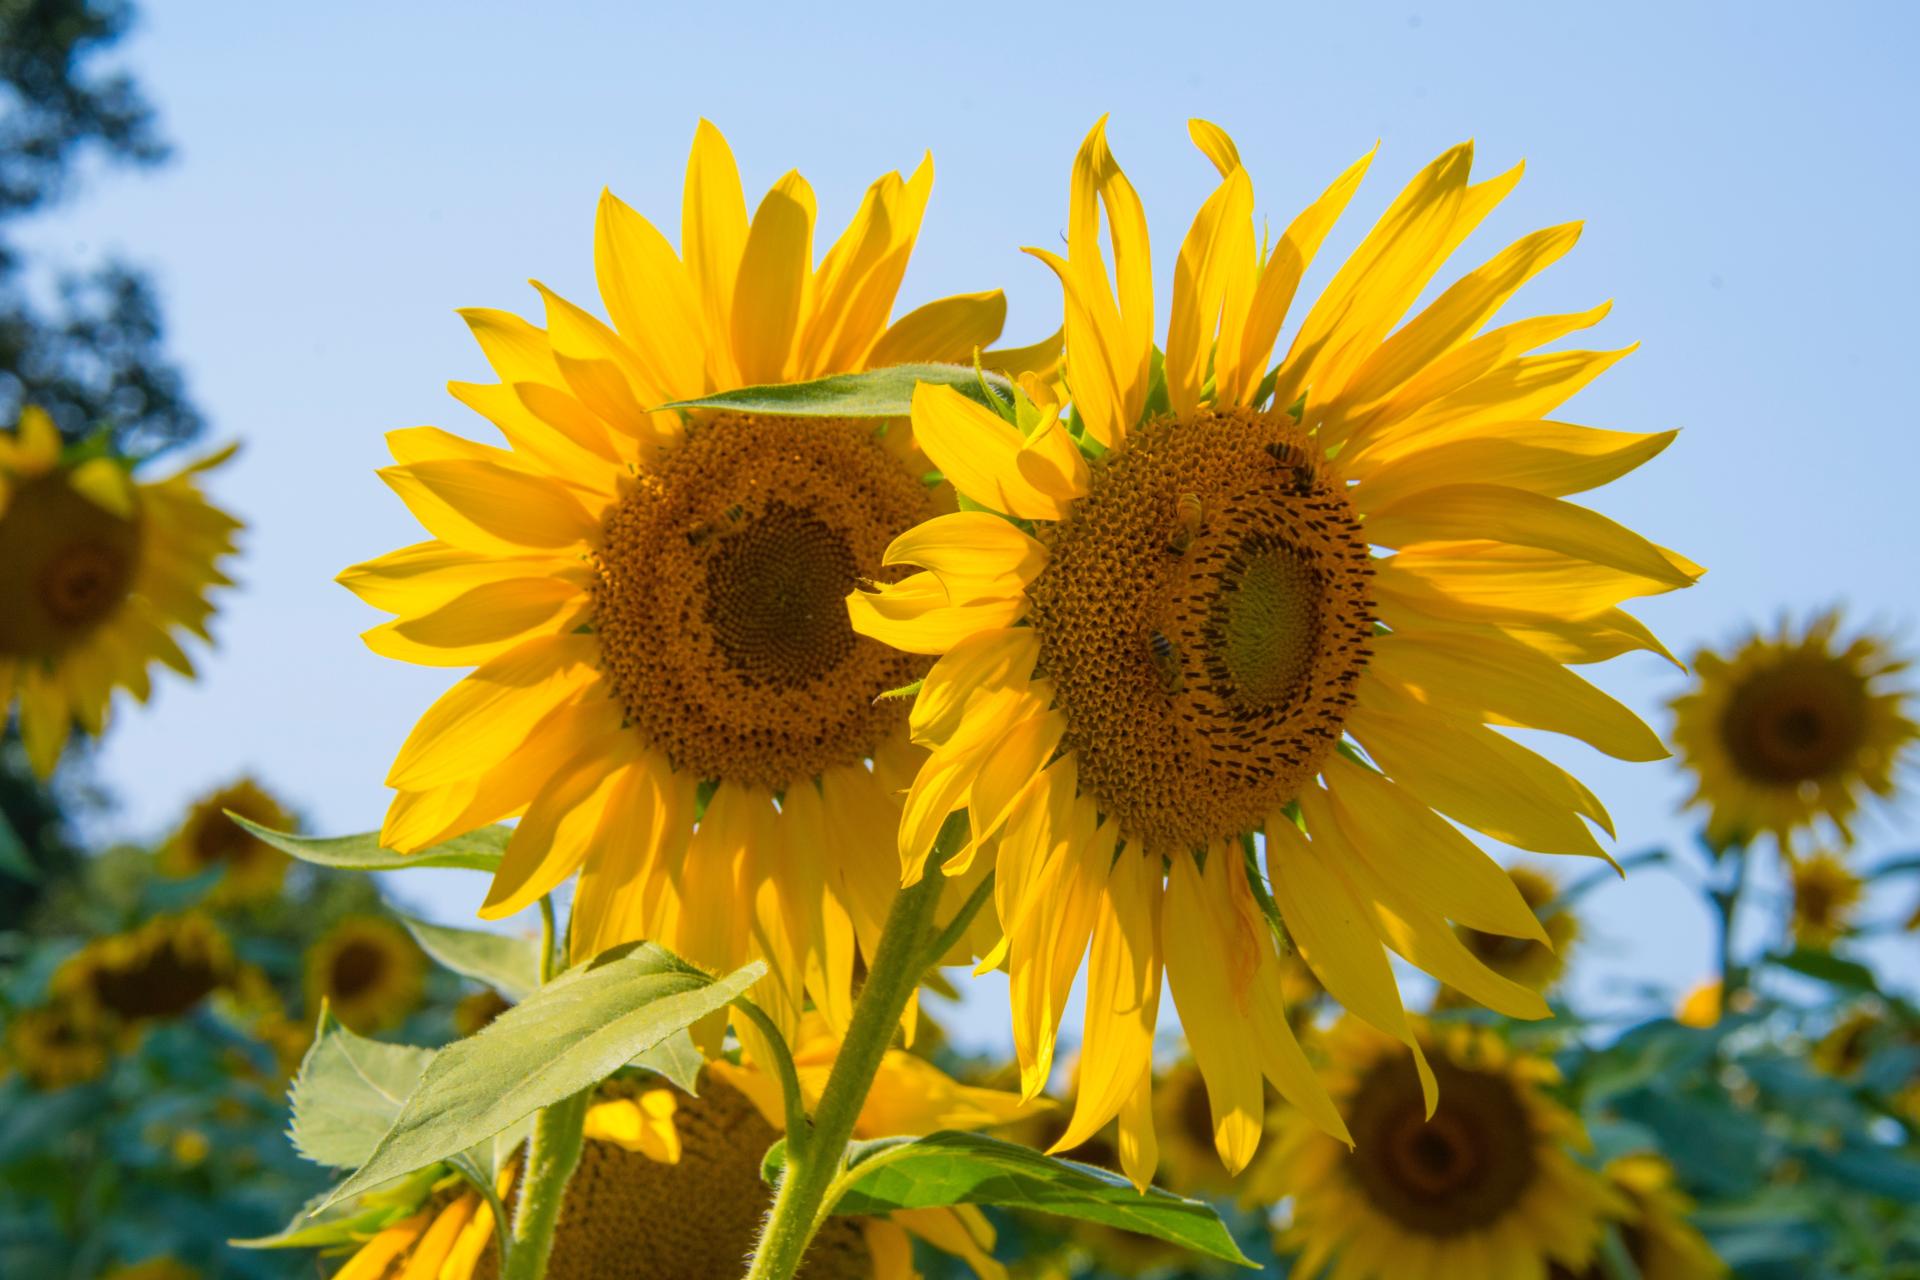 A field of sunflowers bluured in the background and in the foreground two flowers close-up